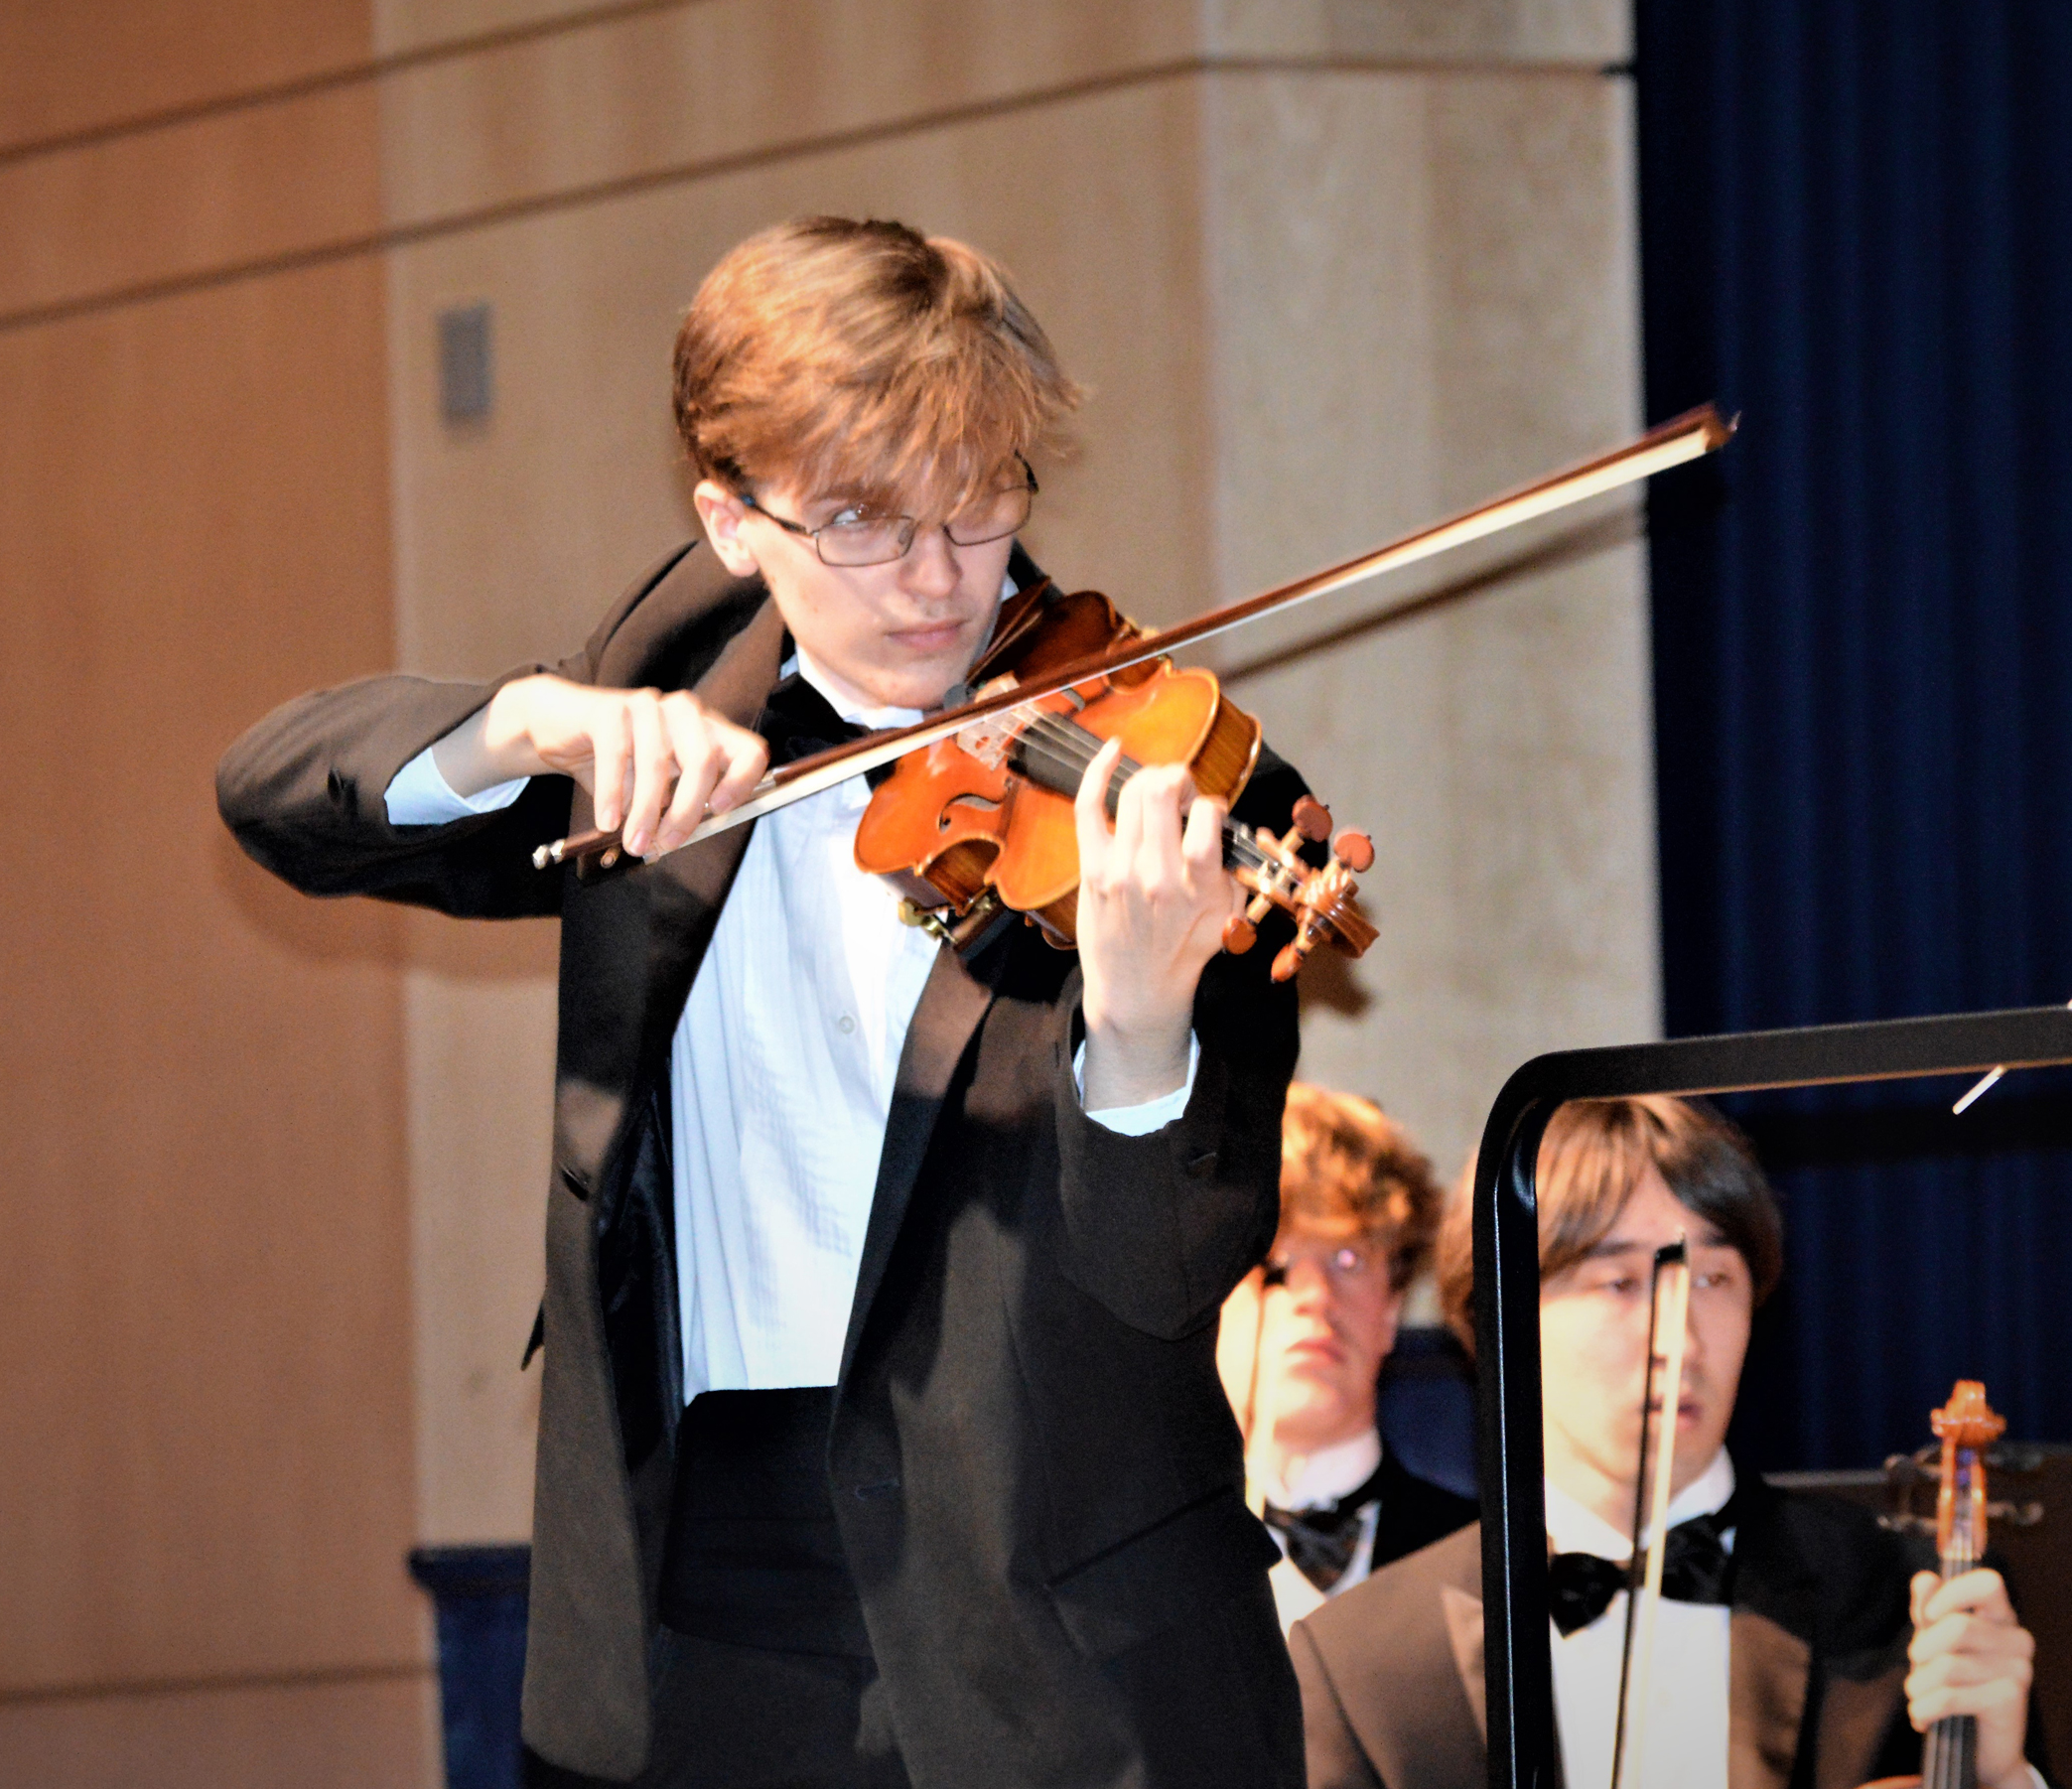 Concerto competition winner performing Sibelius